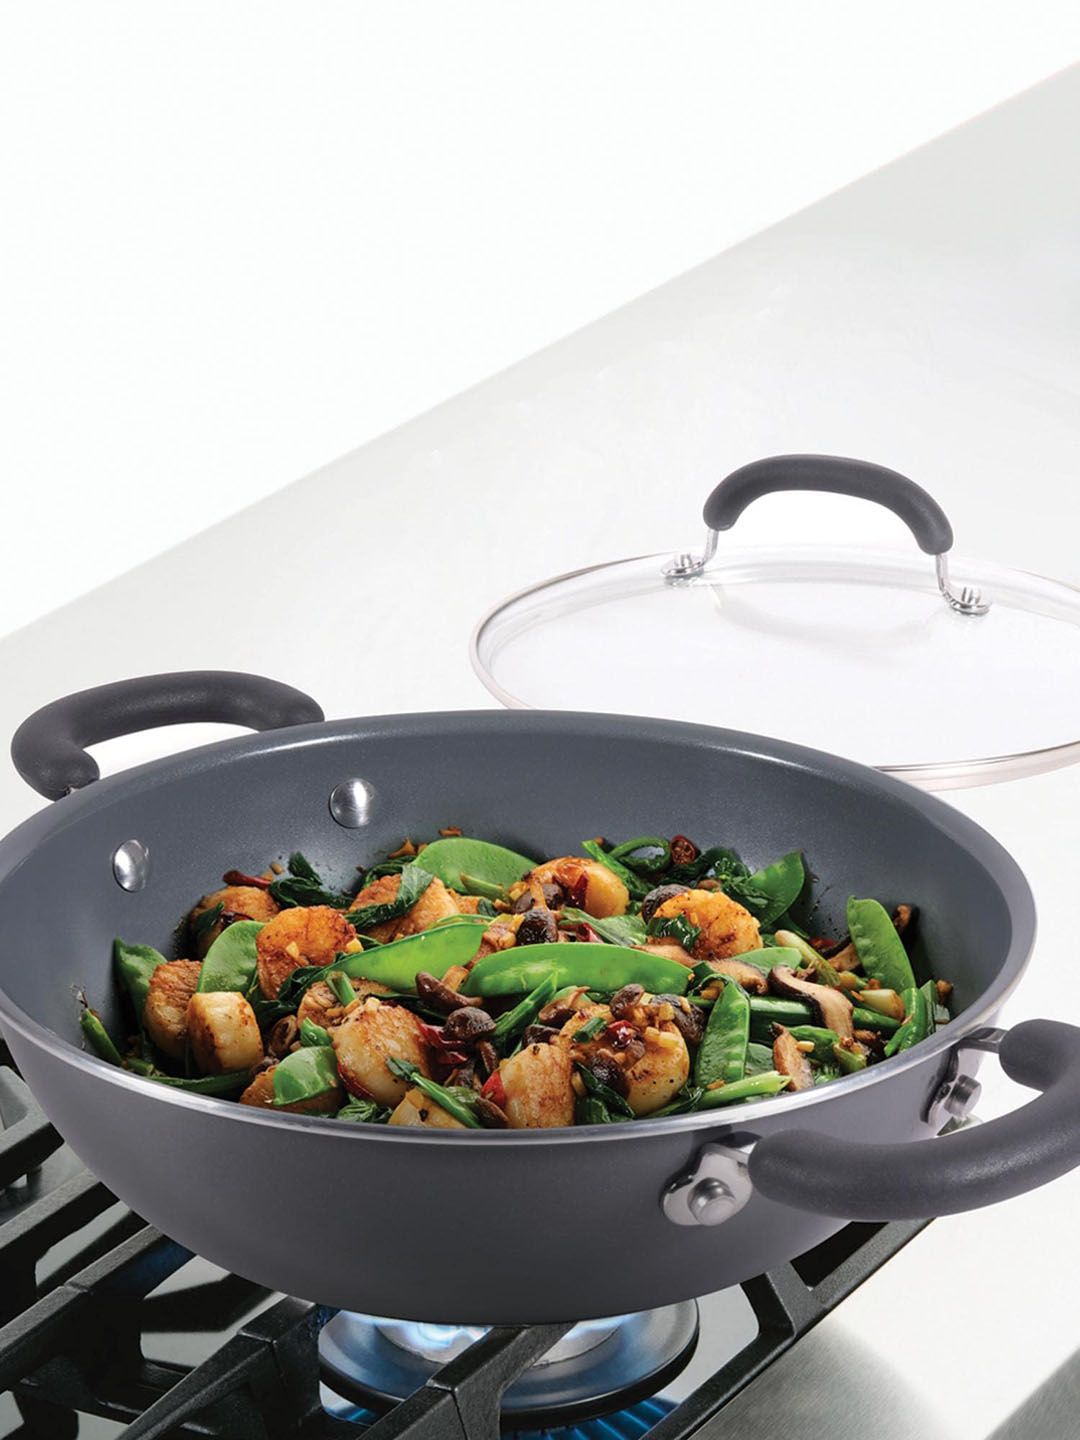 MEYER Silver-Toned Anzen Ceramic Coated Cookware 24cm Kadai With Lid Price in India